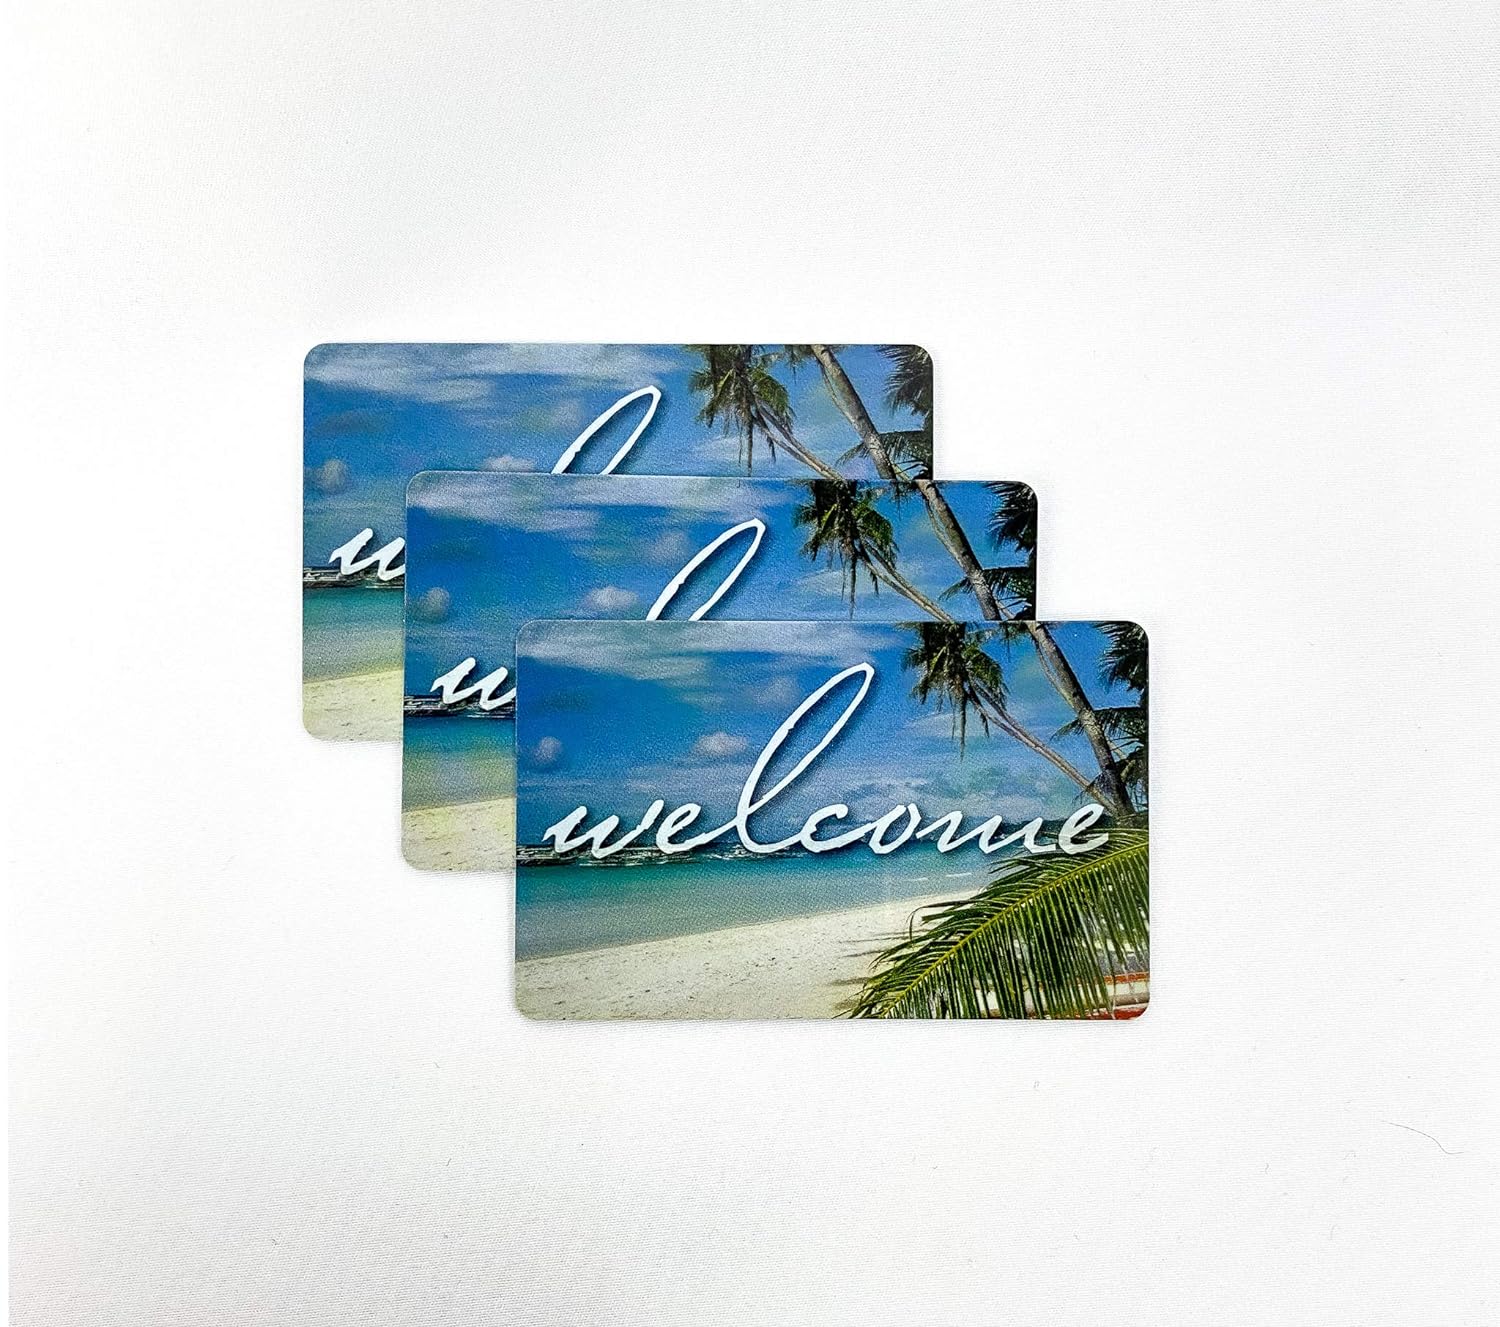 RFID Key Cards (MF1k) for Hotel and Motel Beach Welcome Design (Set of 500)